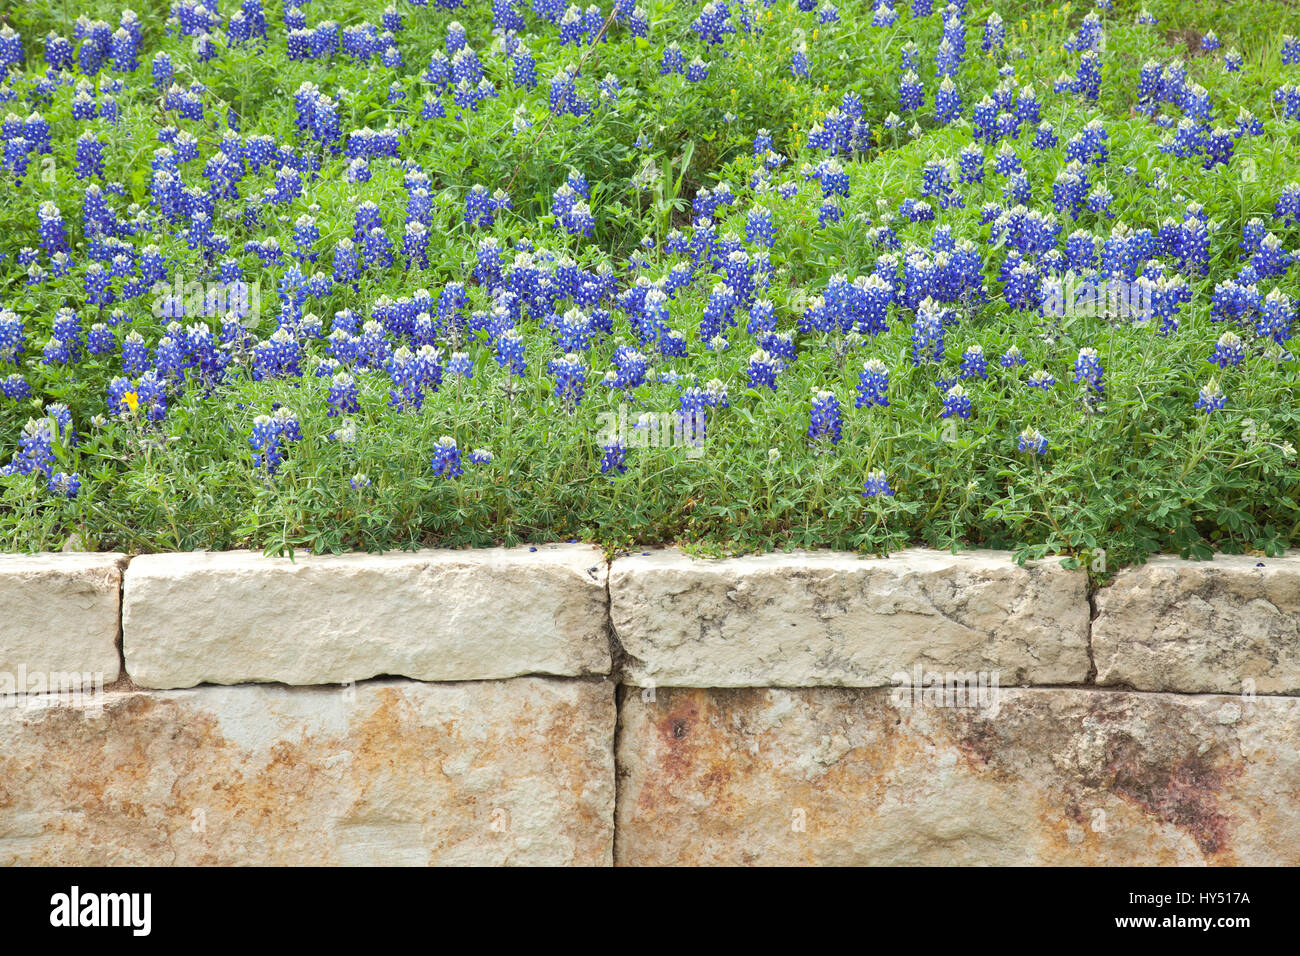 A patch of Texas bluebonnets above a stone wall Stock Photo